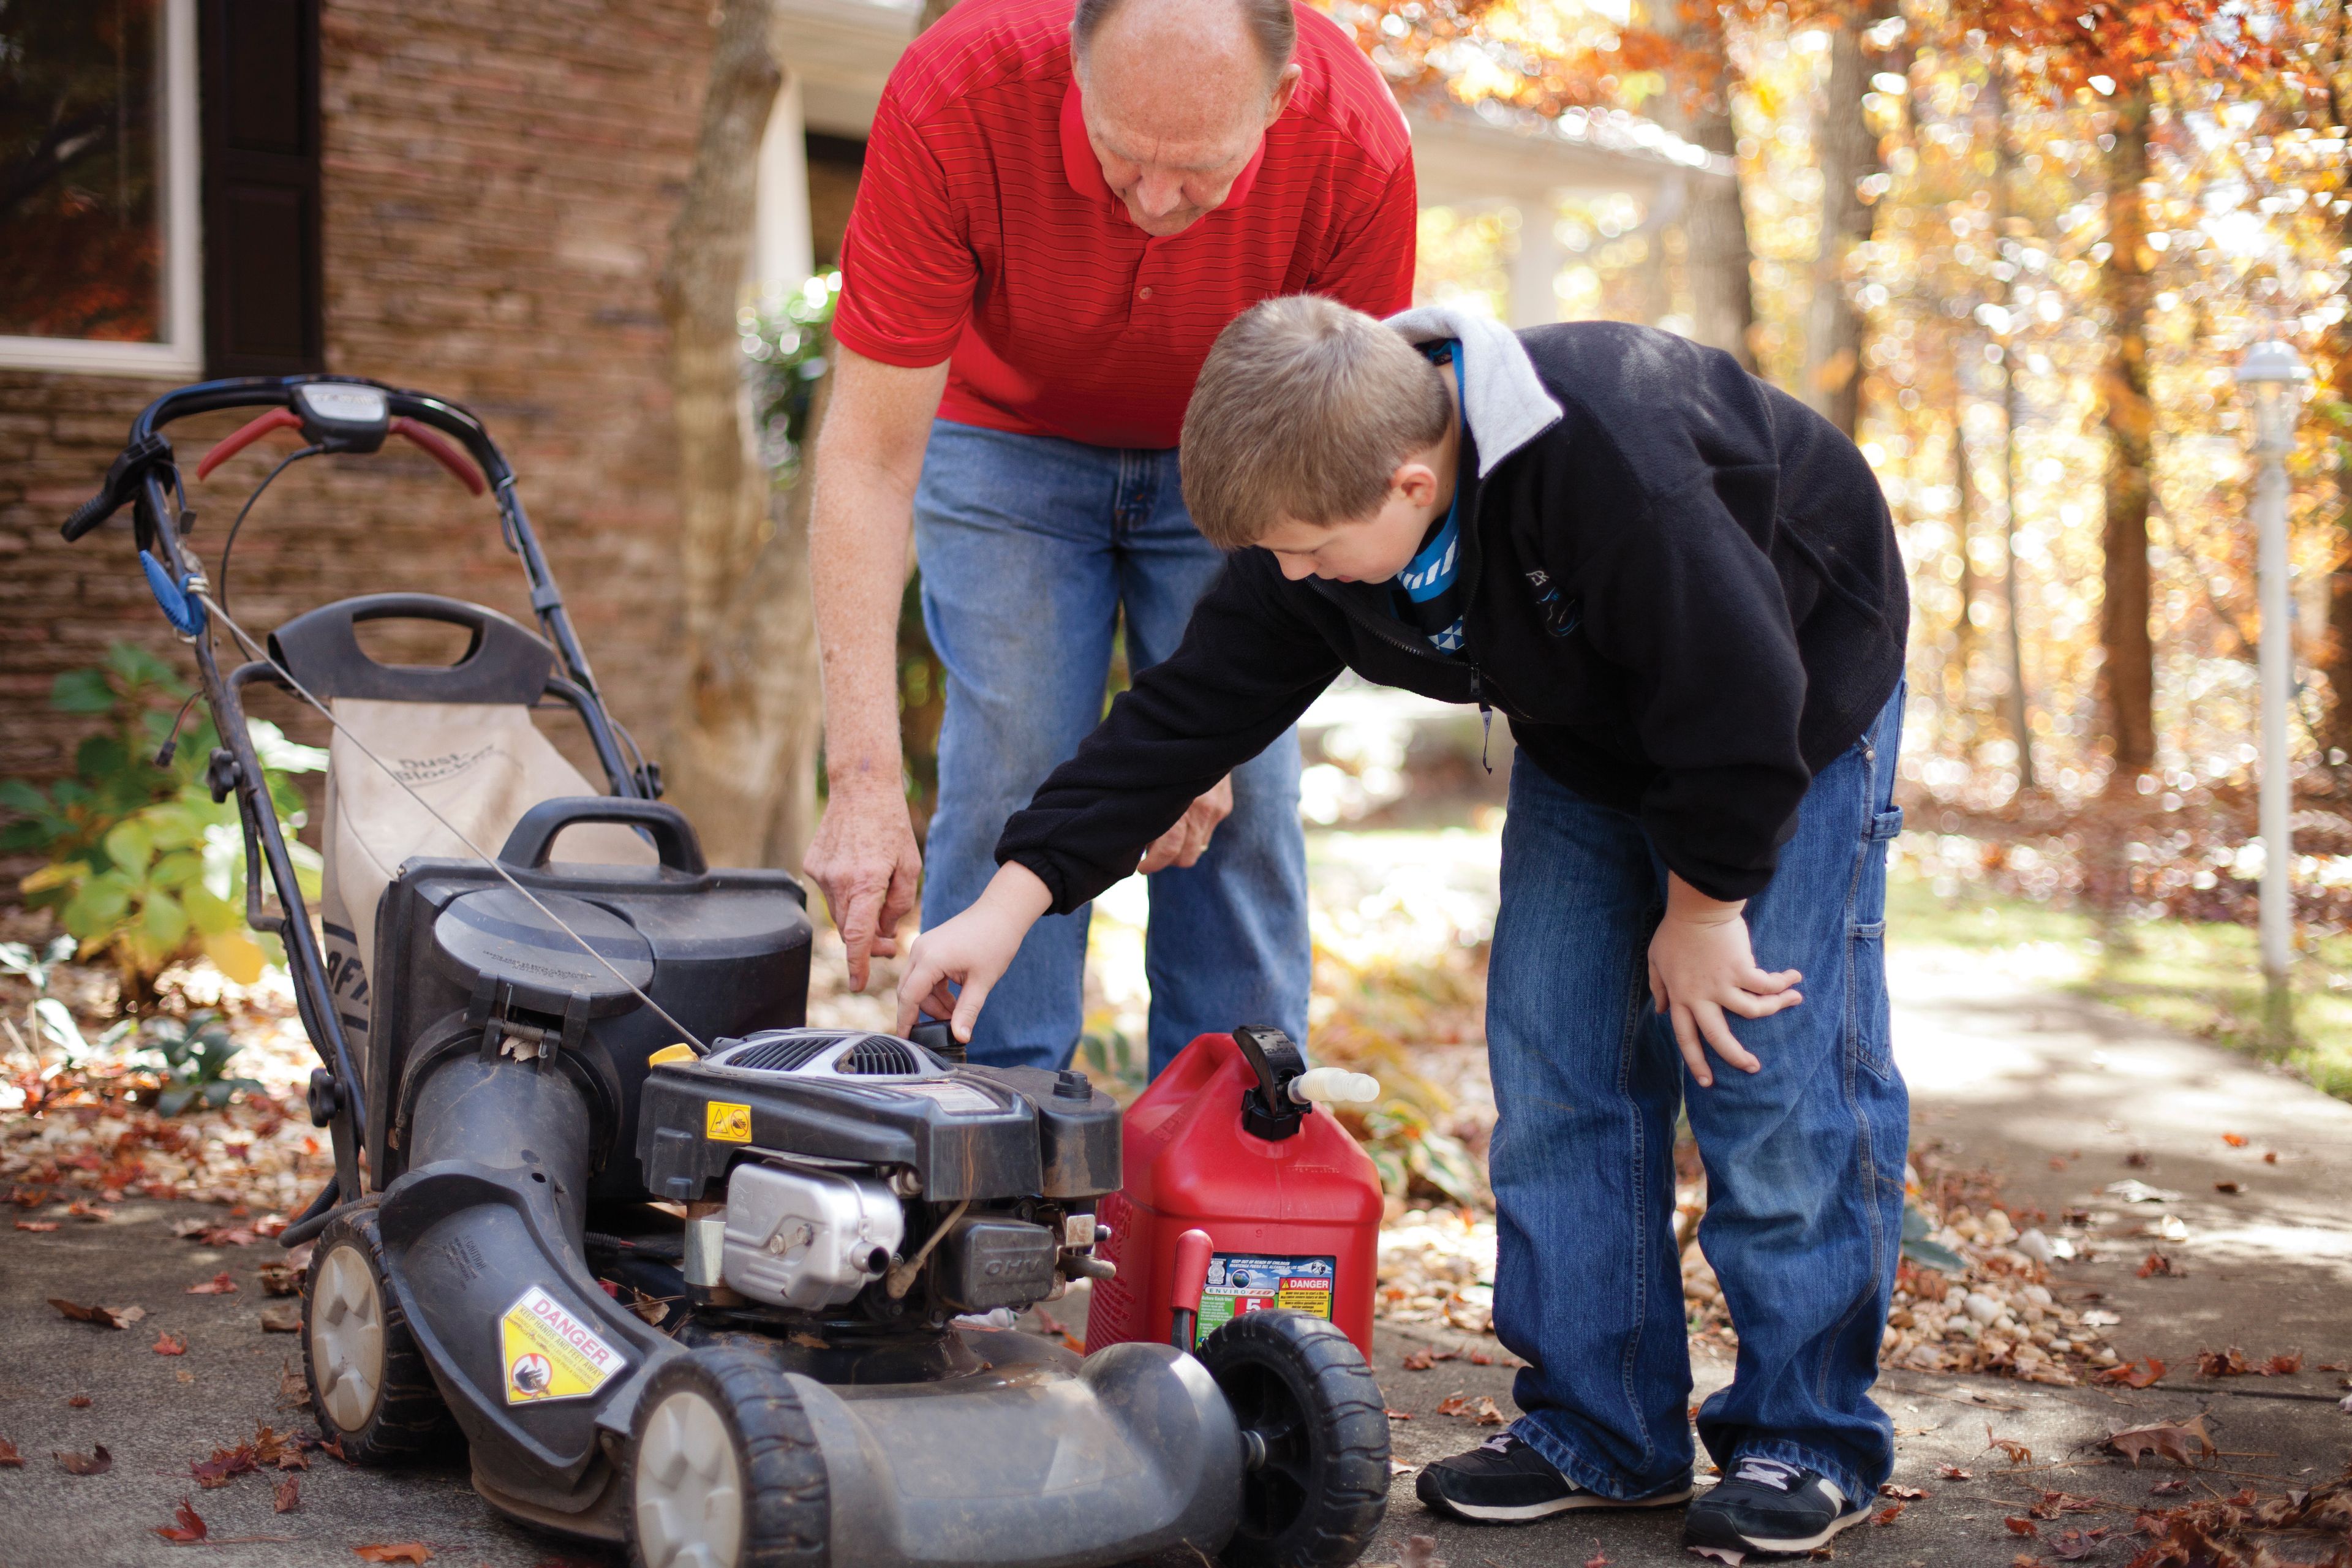 A father teaches his son how to use a lawn mower.